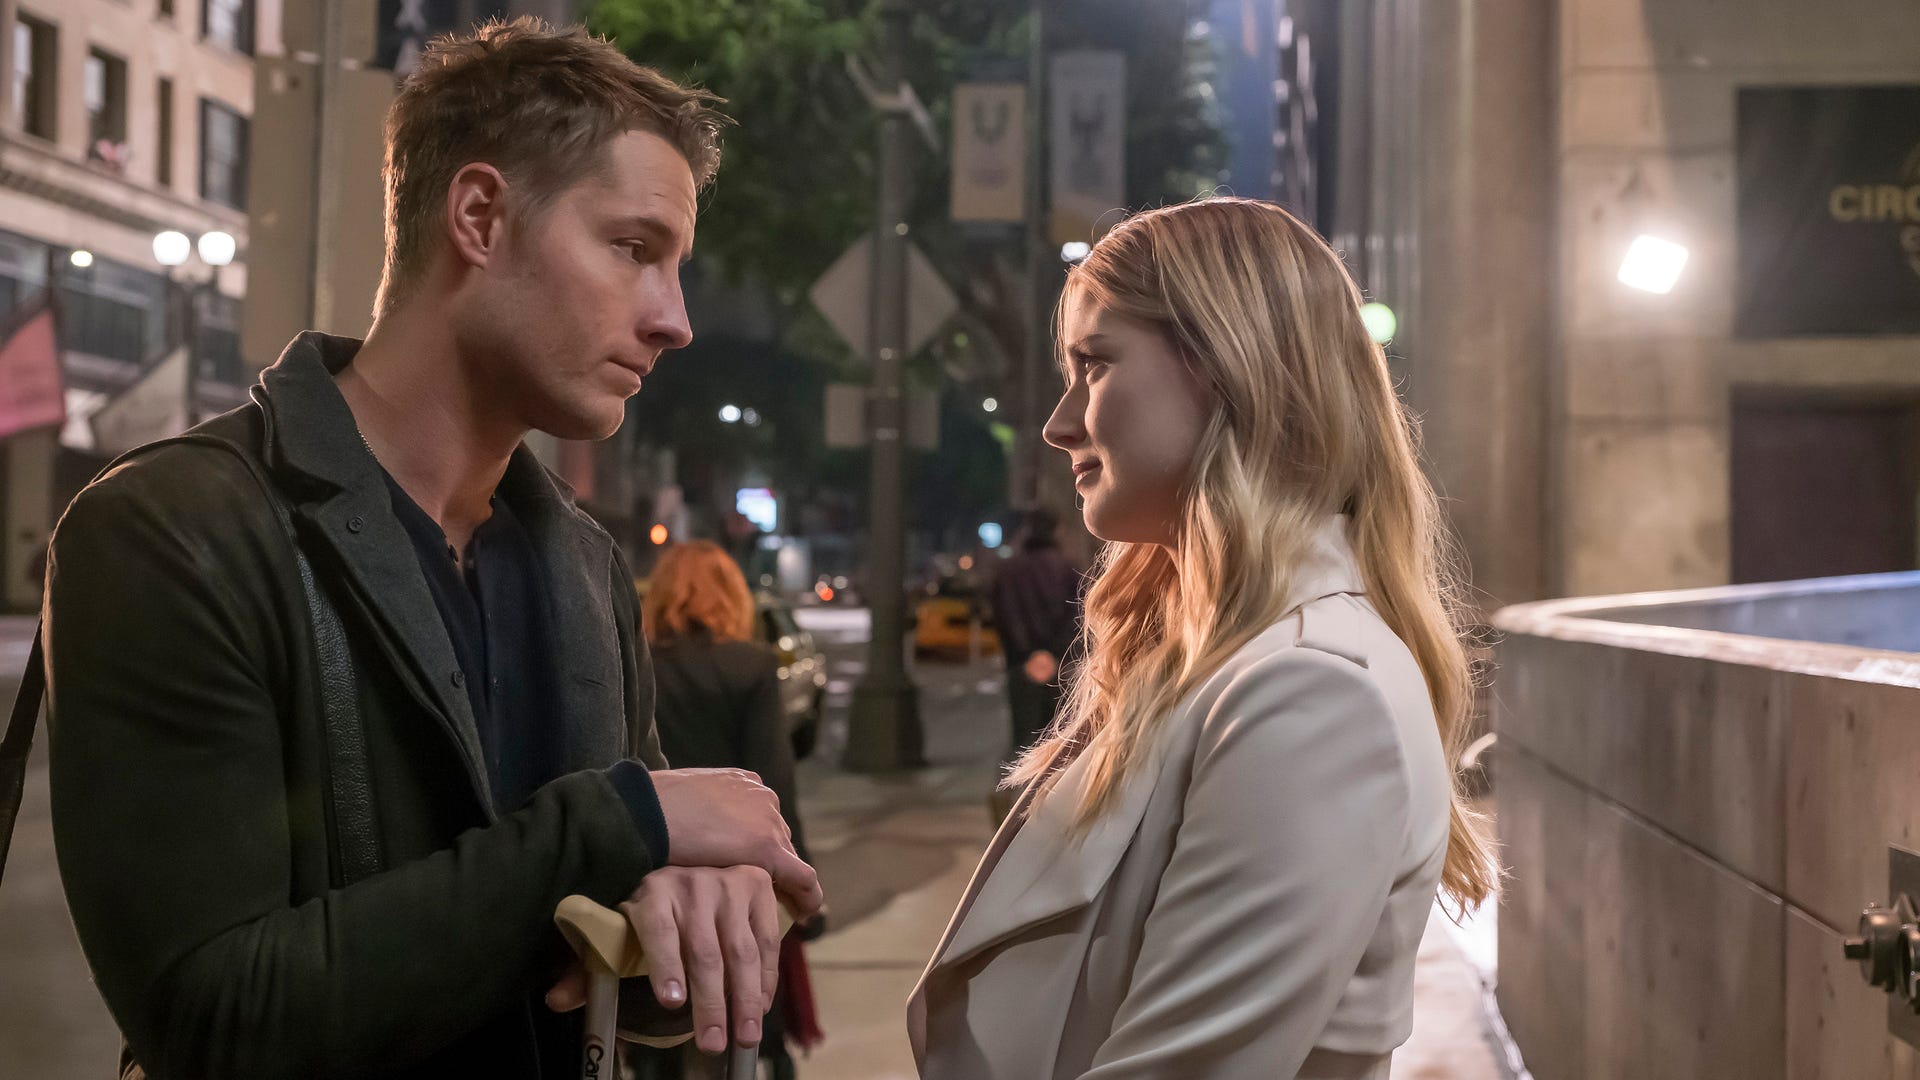 Justin Hartley as Kevin, Alex Breckenridge as Sophie, This Is Us